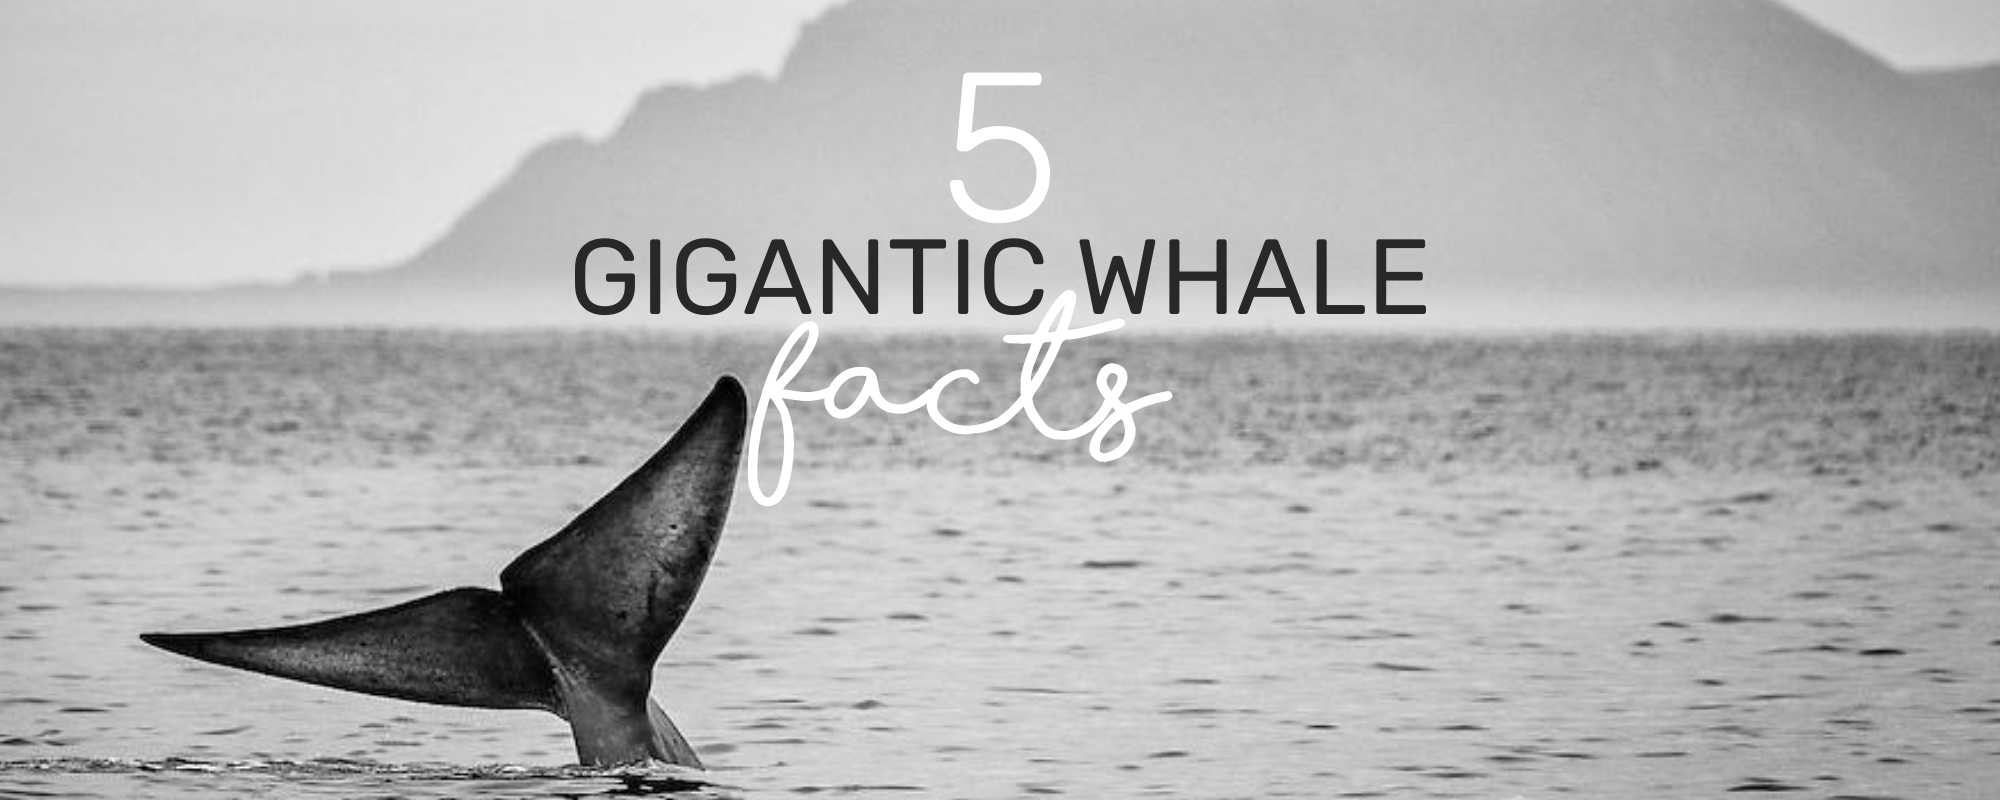 5 GIGANTIC WHALES FACTS